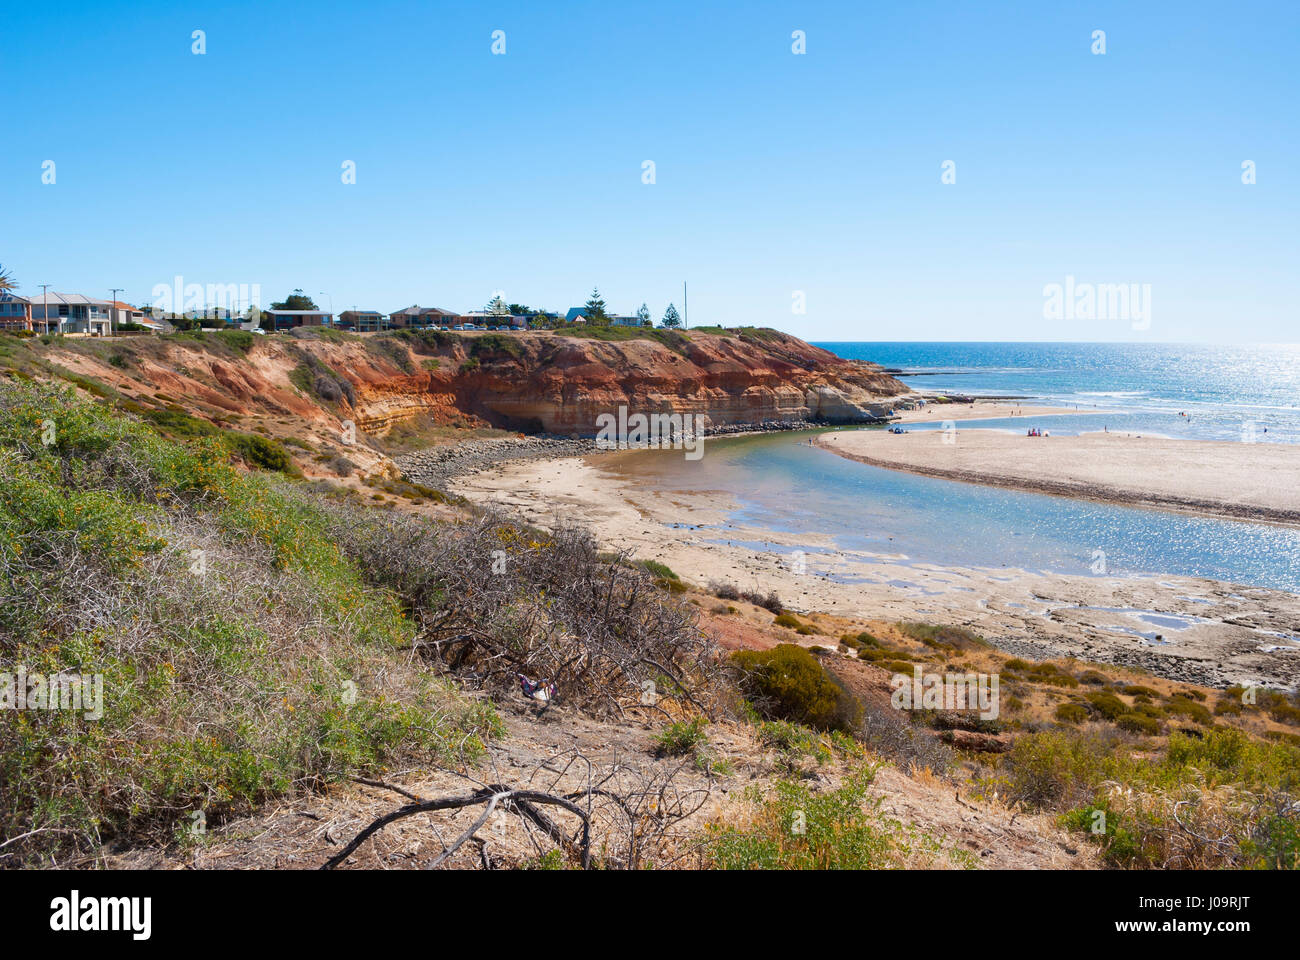 Southport Beach, where the Adelaide suburbs of Port Noarlunga and Port Noarlunga South suburbs meet, divided by the Onkaparinga river estuary. Stock Photo